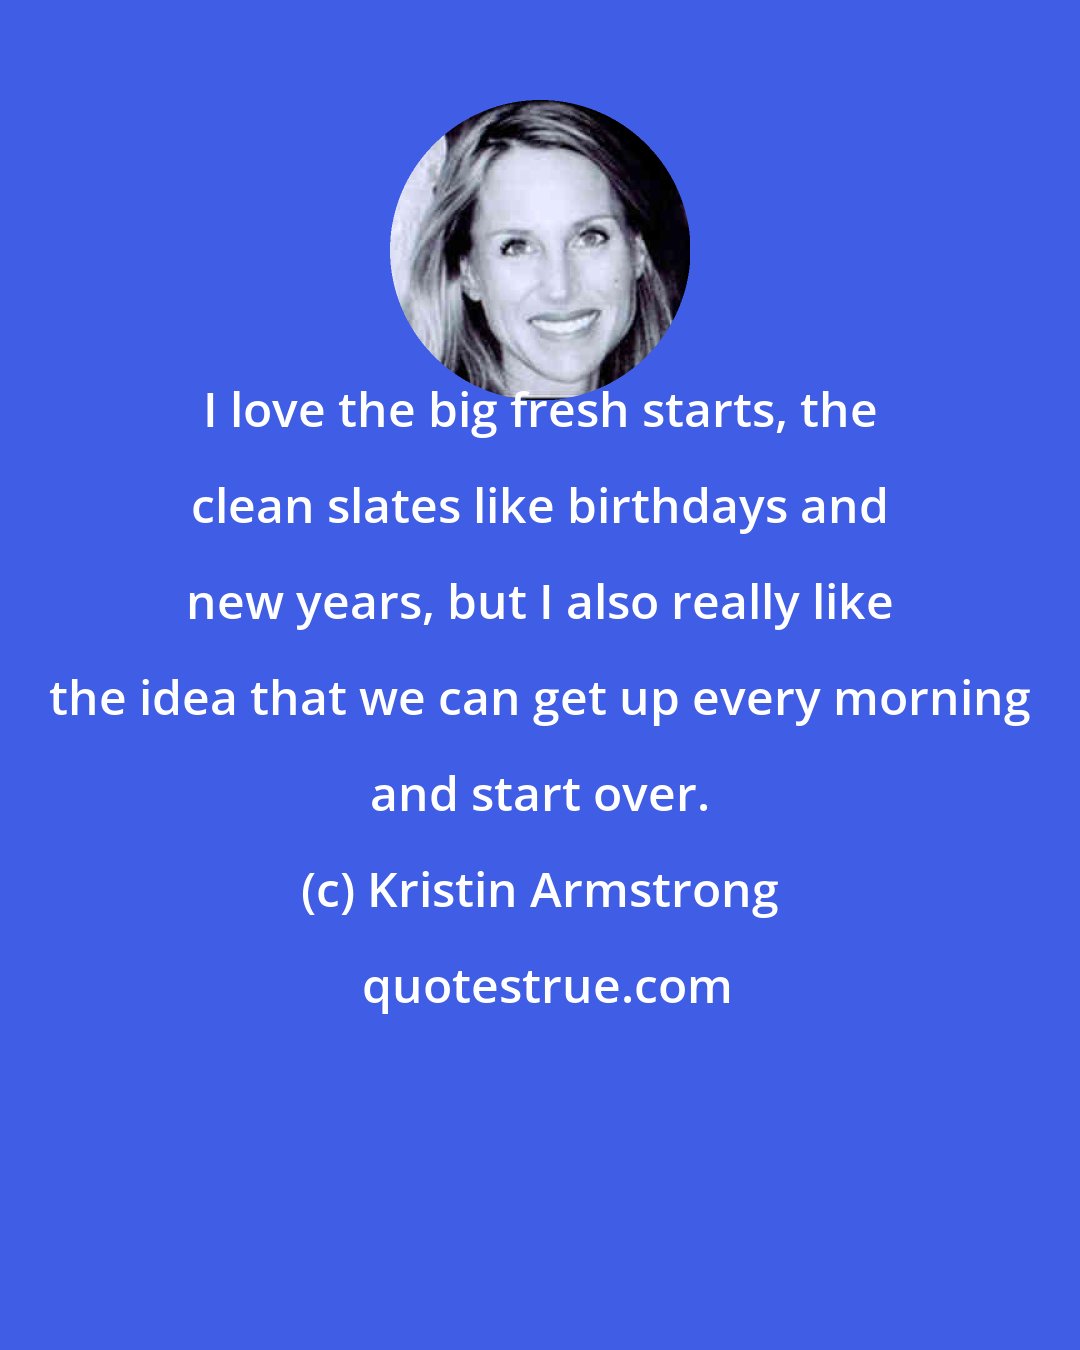 Kristin Armstrong: I love the big fresh starts, the clean slates like birthdays and new years, but I also really like the idea that we can get up every morning and start over.